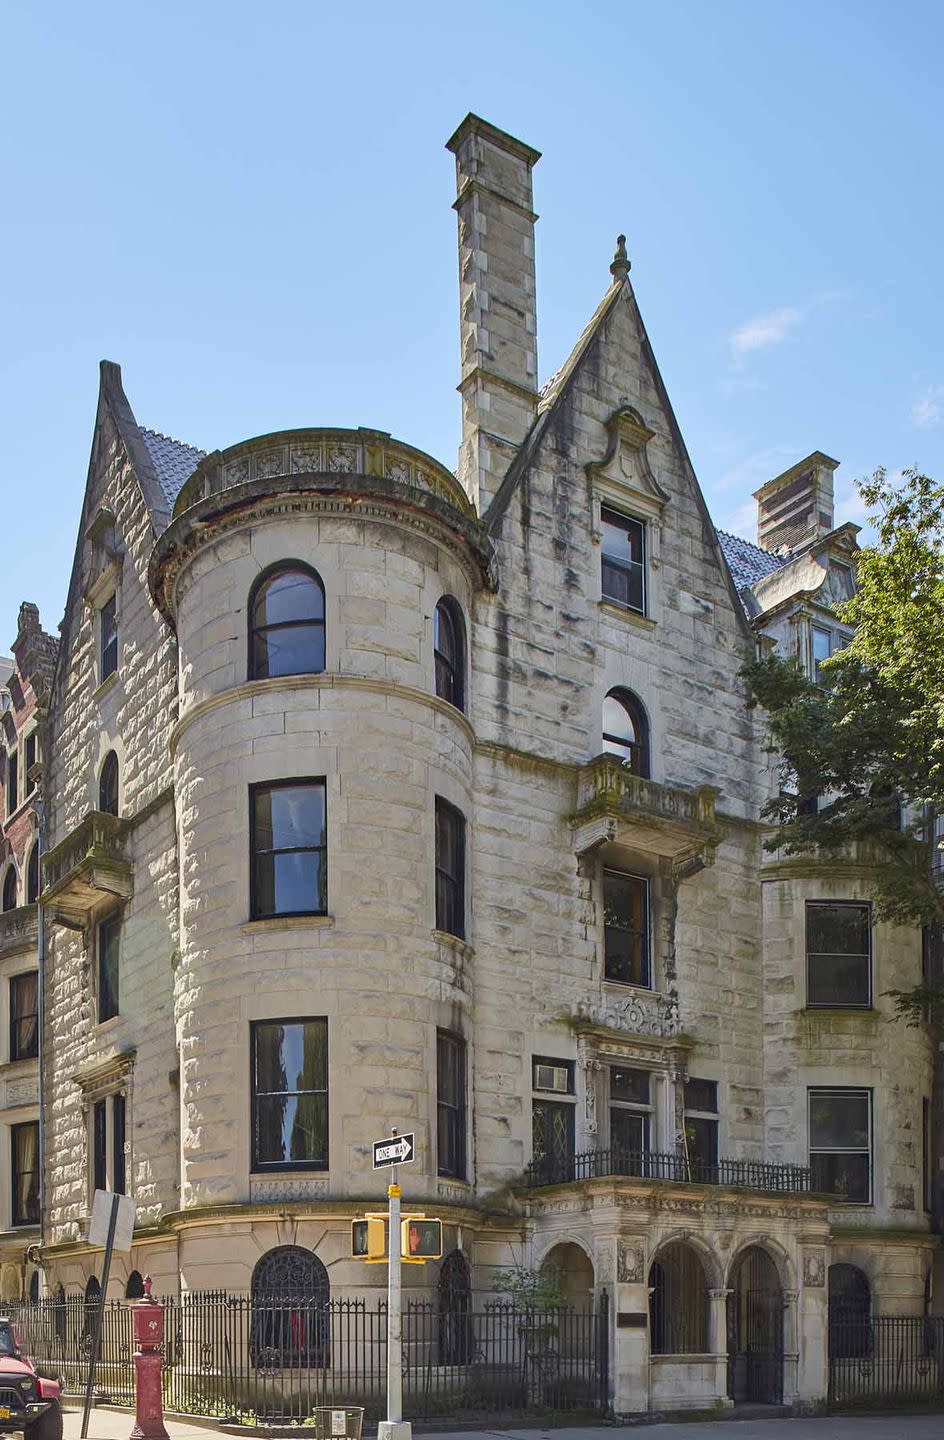 Famed architect Clarence True built the property in 1898.